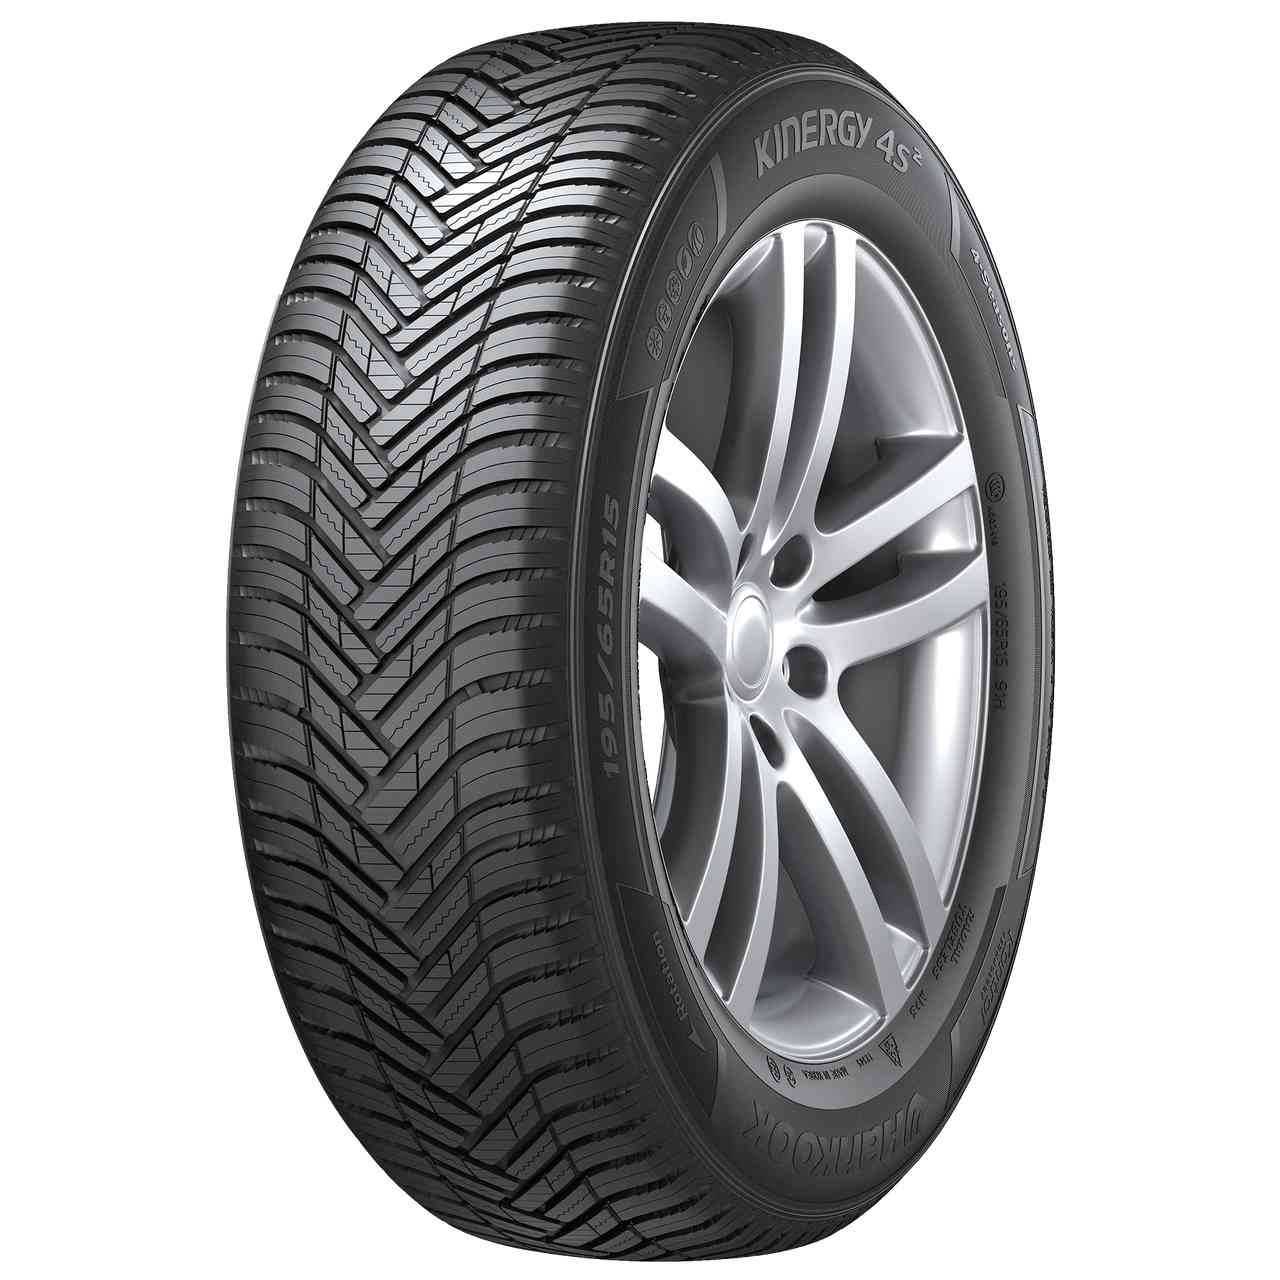 HANKOOK KINERGY 4S 2 (H750) 195/65R15 91H BSW